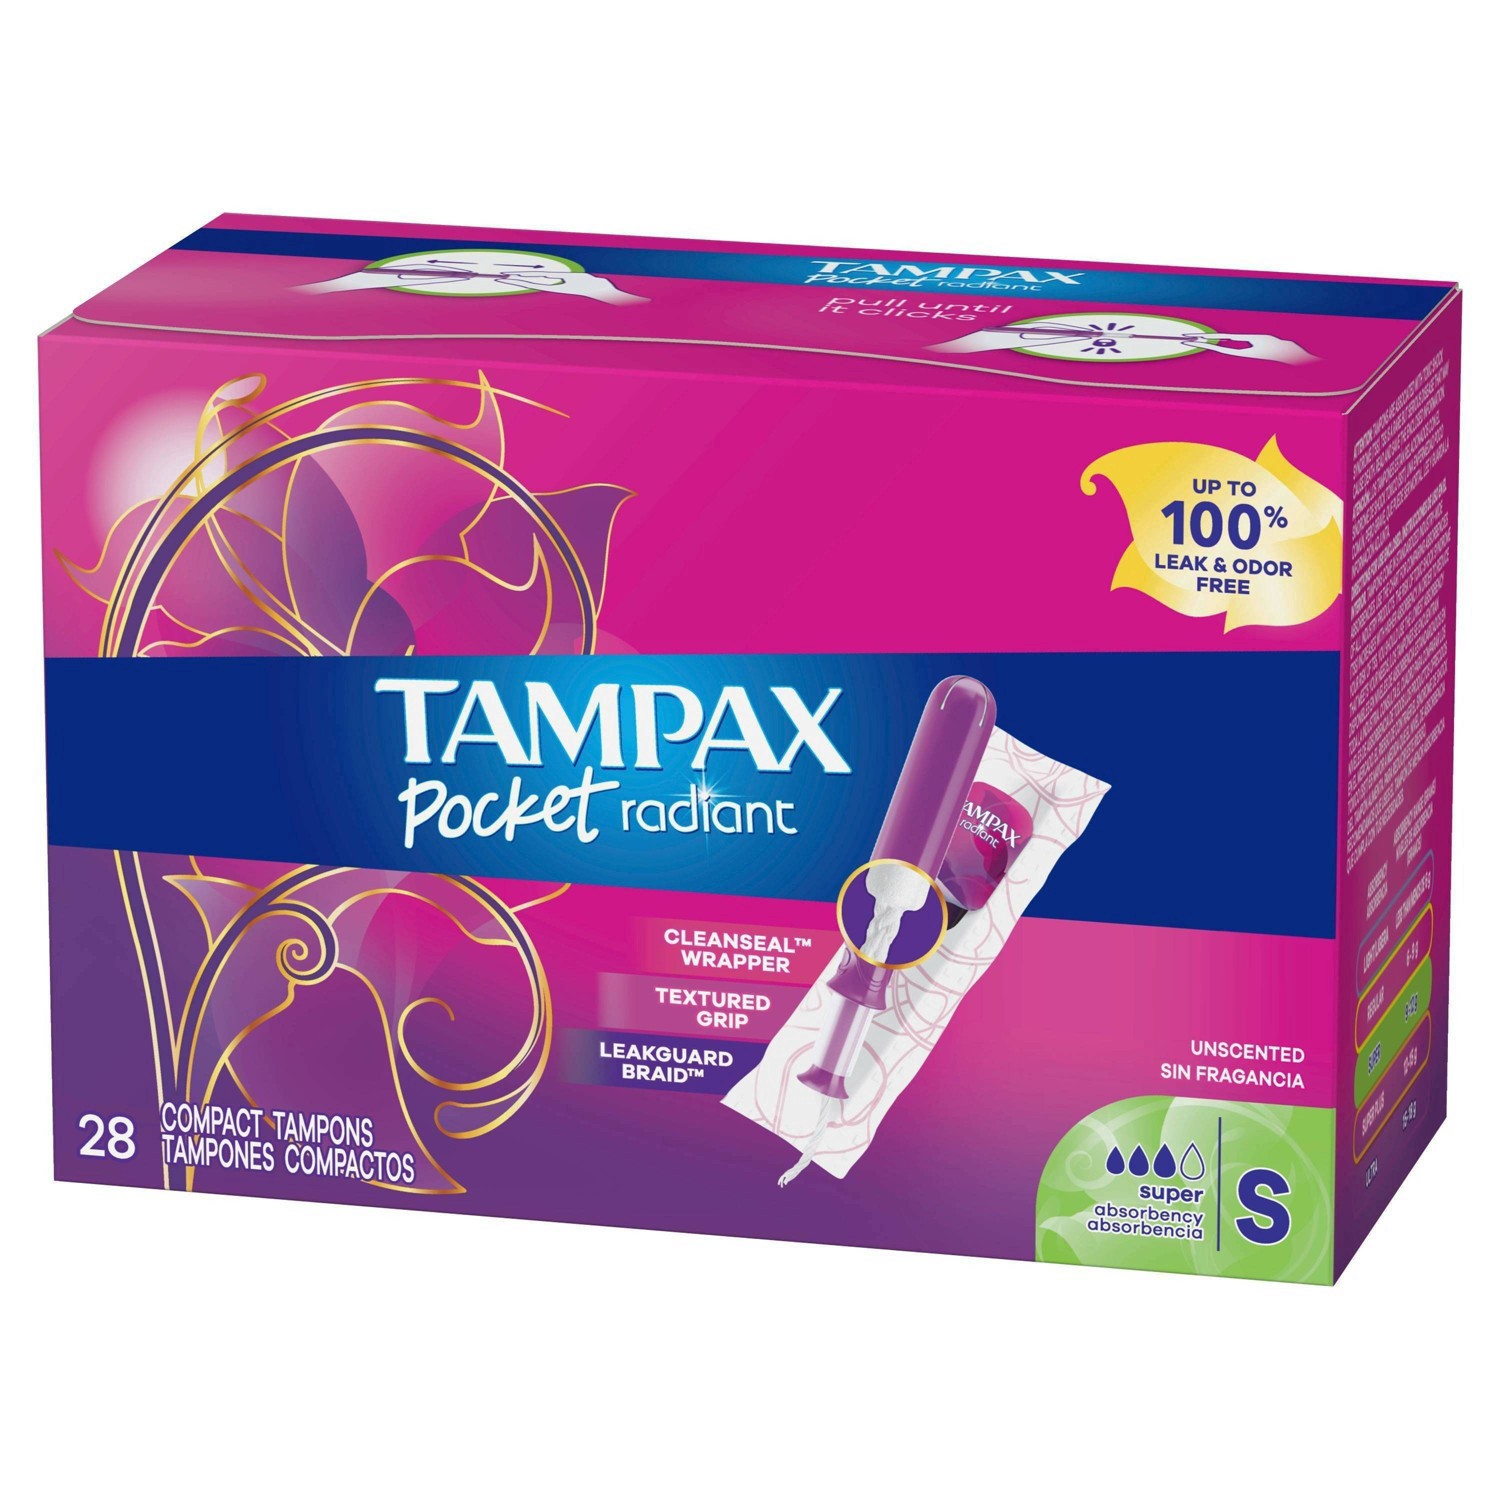 slide 4 of 94, Tampax Pocket Radiant Compact Plastic Tampons, With LeakGuard Braid, Super Absorbency, Unscented, 28 Count, 28 ct